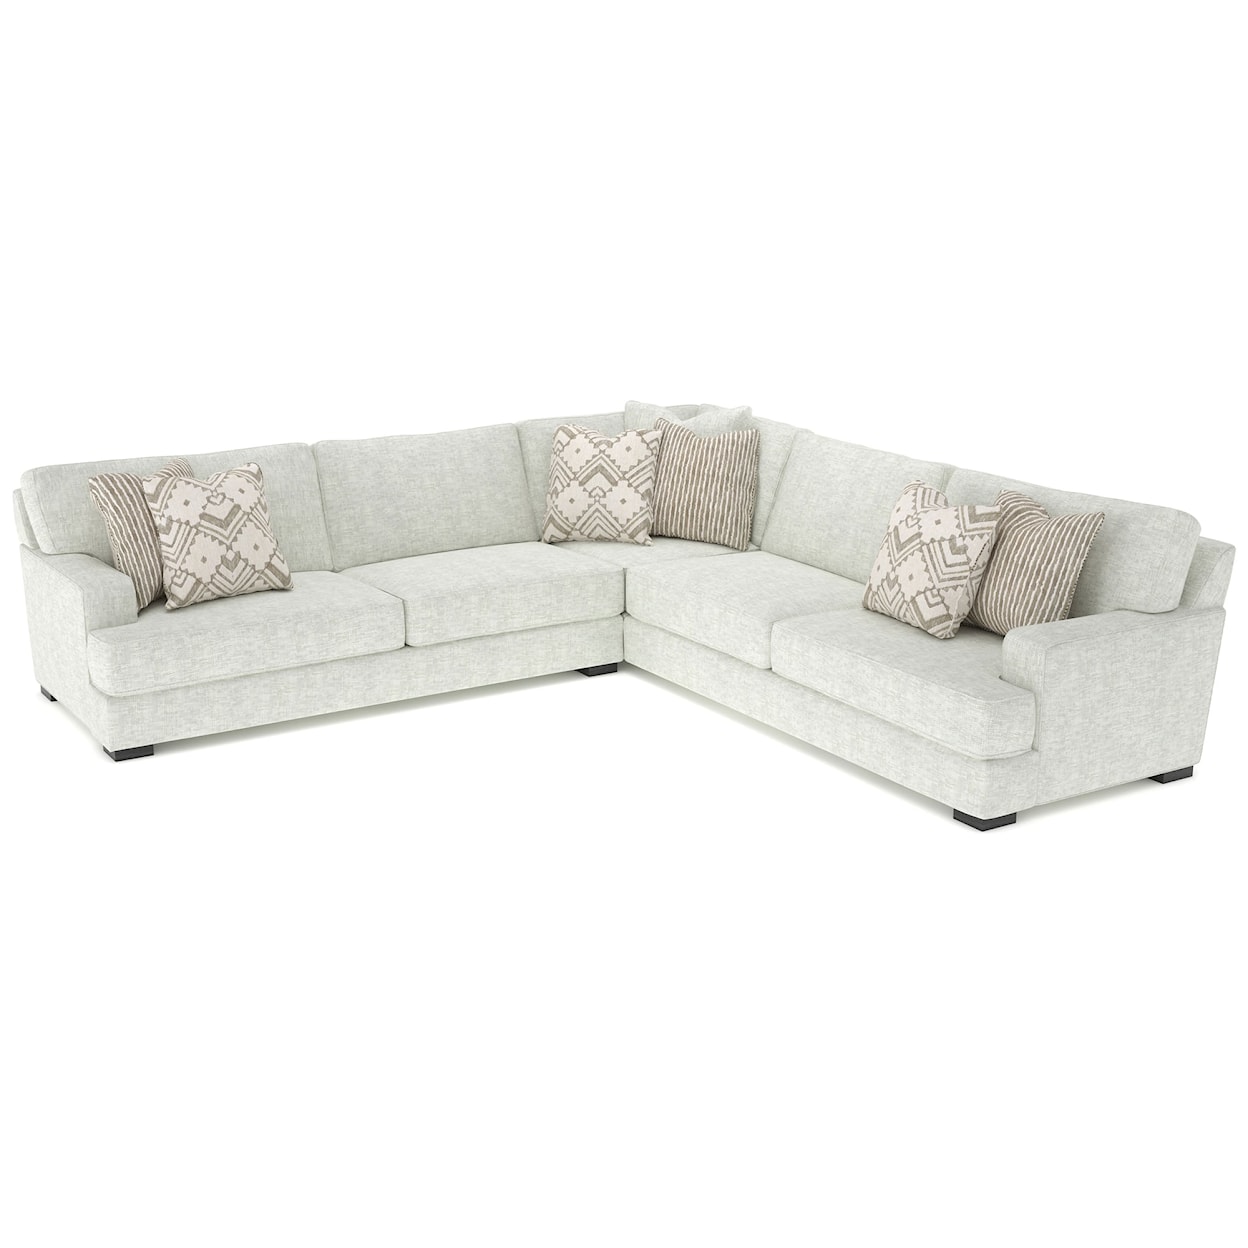 Sunset Home 575 2-Piece Sectional Sofa